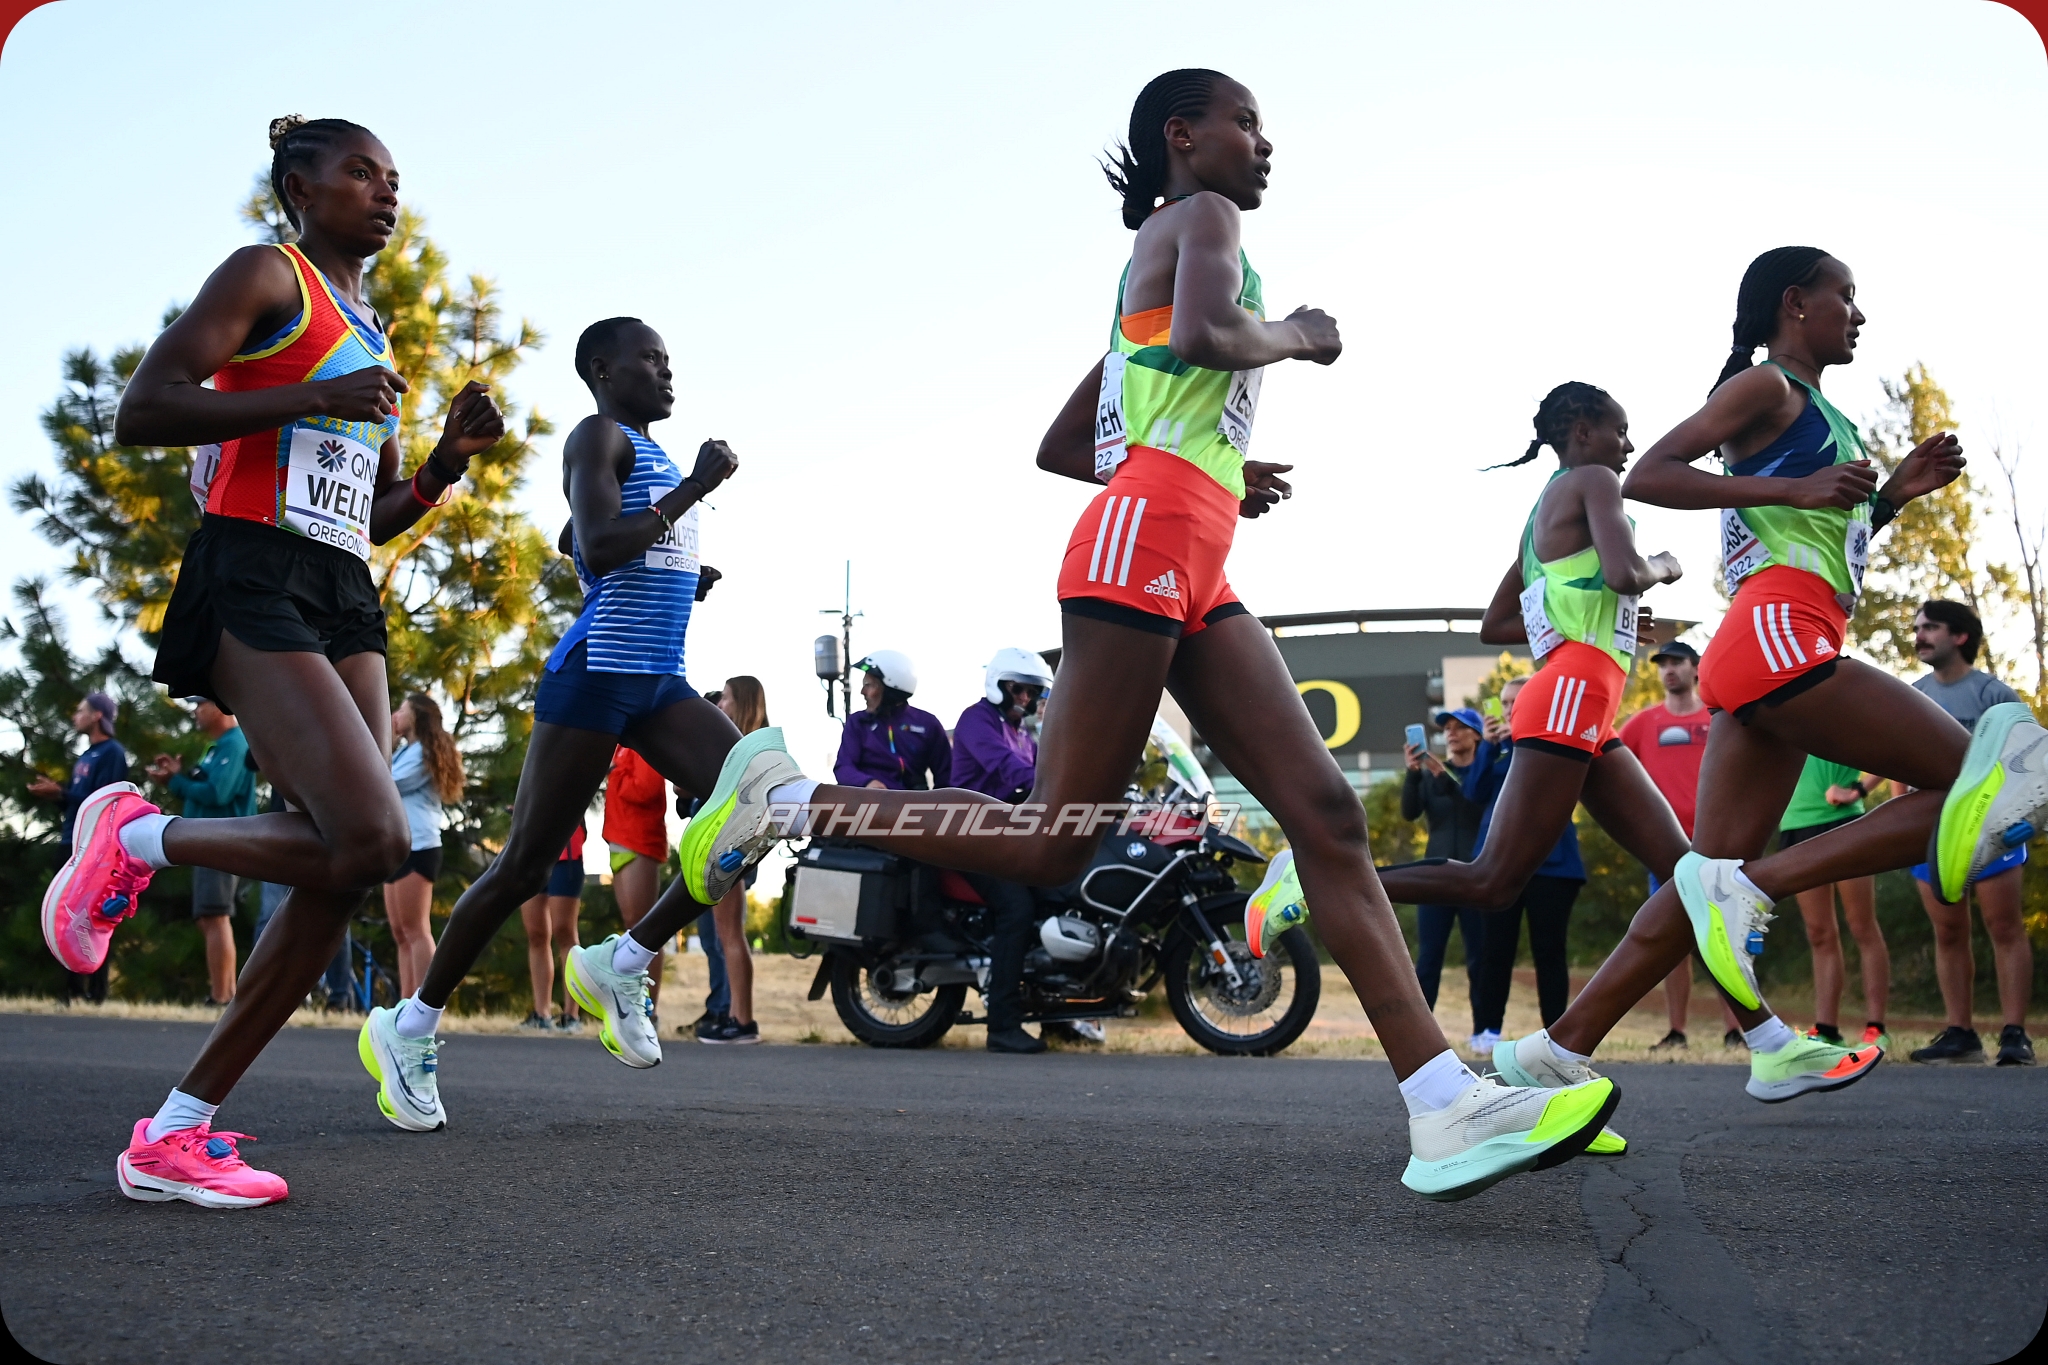 EUGENE, OREGON - JULY 18: Nazret Weldu of Team Eritrea and Ababel Yeshaneh of Team Ethiopia compete in the Women's Marathon on day four of the World Athletics Championships Oregon22 at Hayward Field on July 18, 2022 in Eugene, Oregon. (Photo by Hannah Peters/Getty Images for World Athletics)